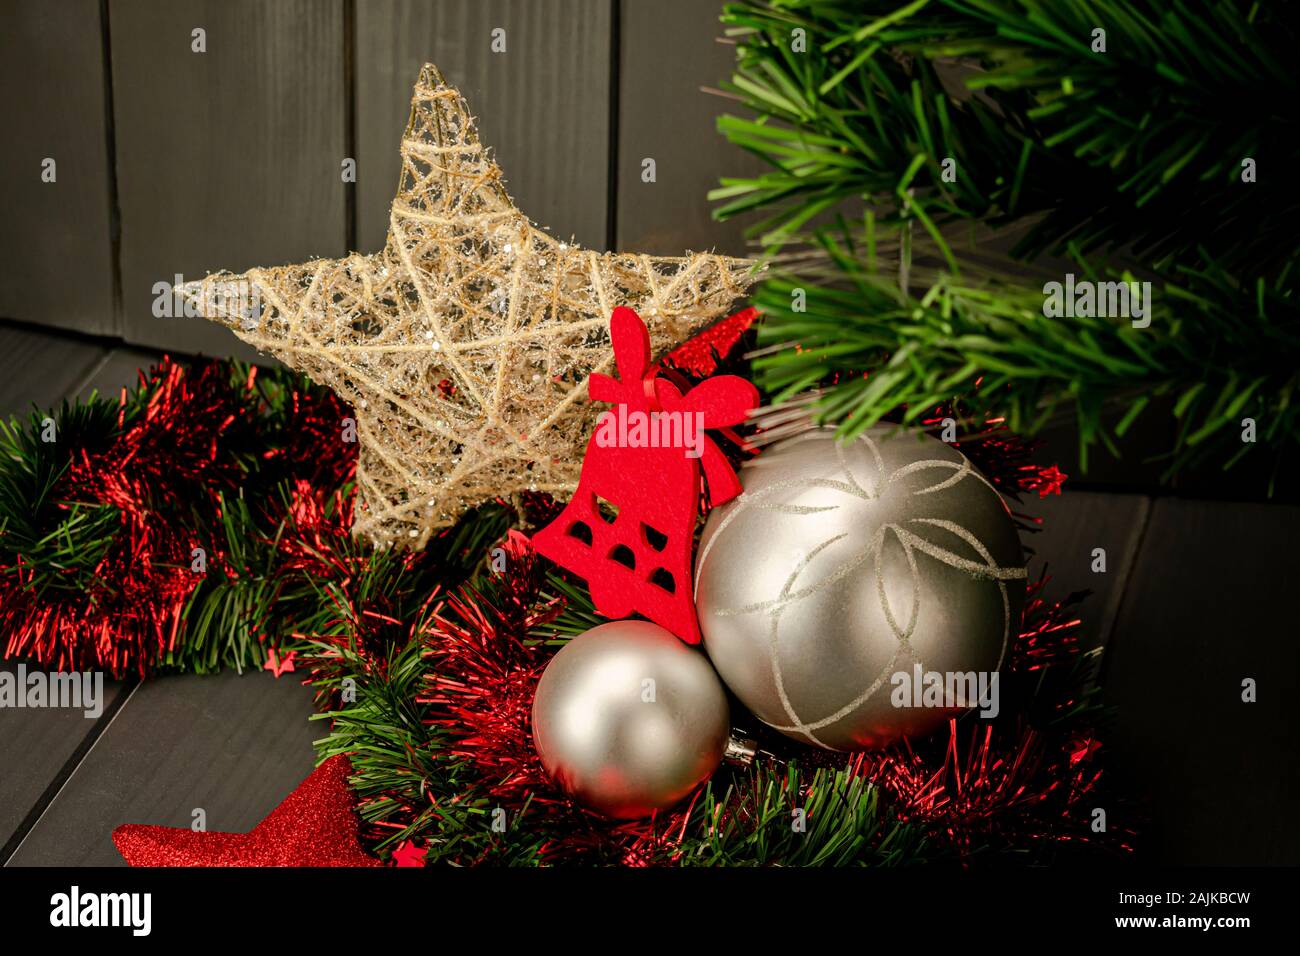 Christmas decoration with silver balls, green and red tinsel, red and gold stars, velvet bell and Christmas tree on dark wooden background Stock Photo